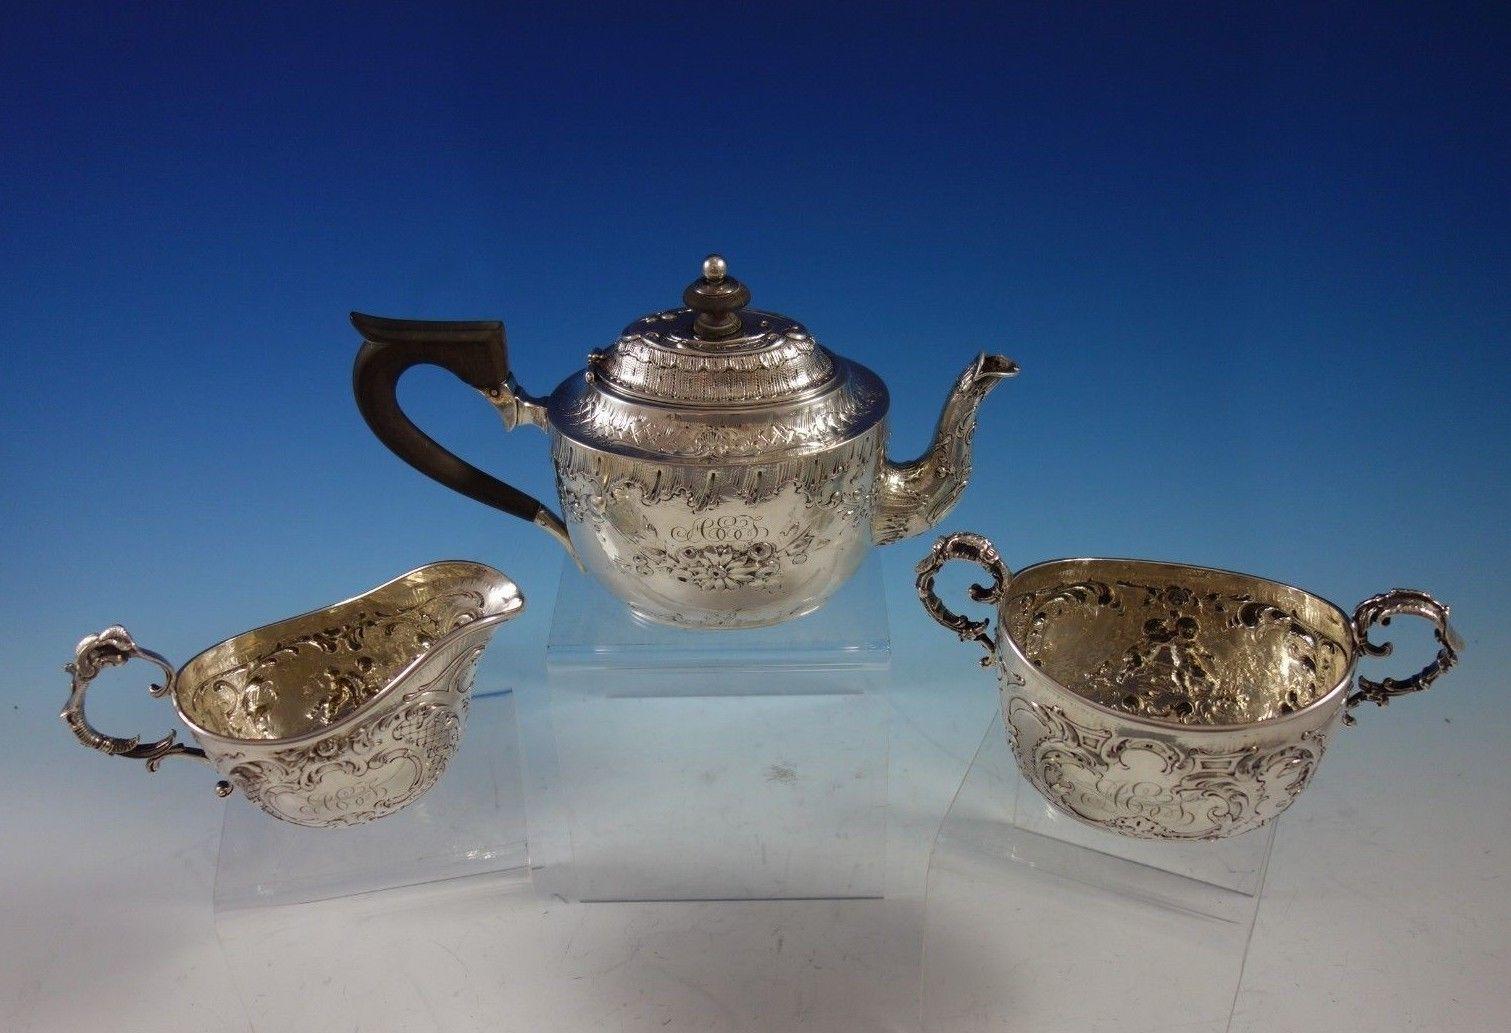 Exceptional German .800 silver tea set of 3-piece with Hanau pseudo hallmarks. The set has repoussed figural cupids and flowers. This set includes:
1 - Tea pot: Measures: 9 1/4